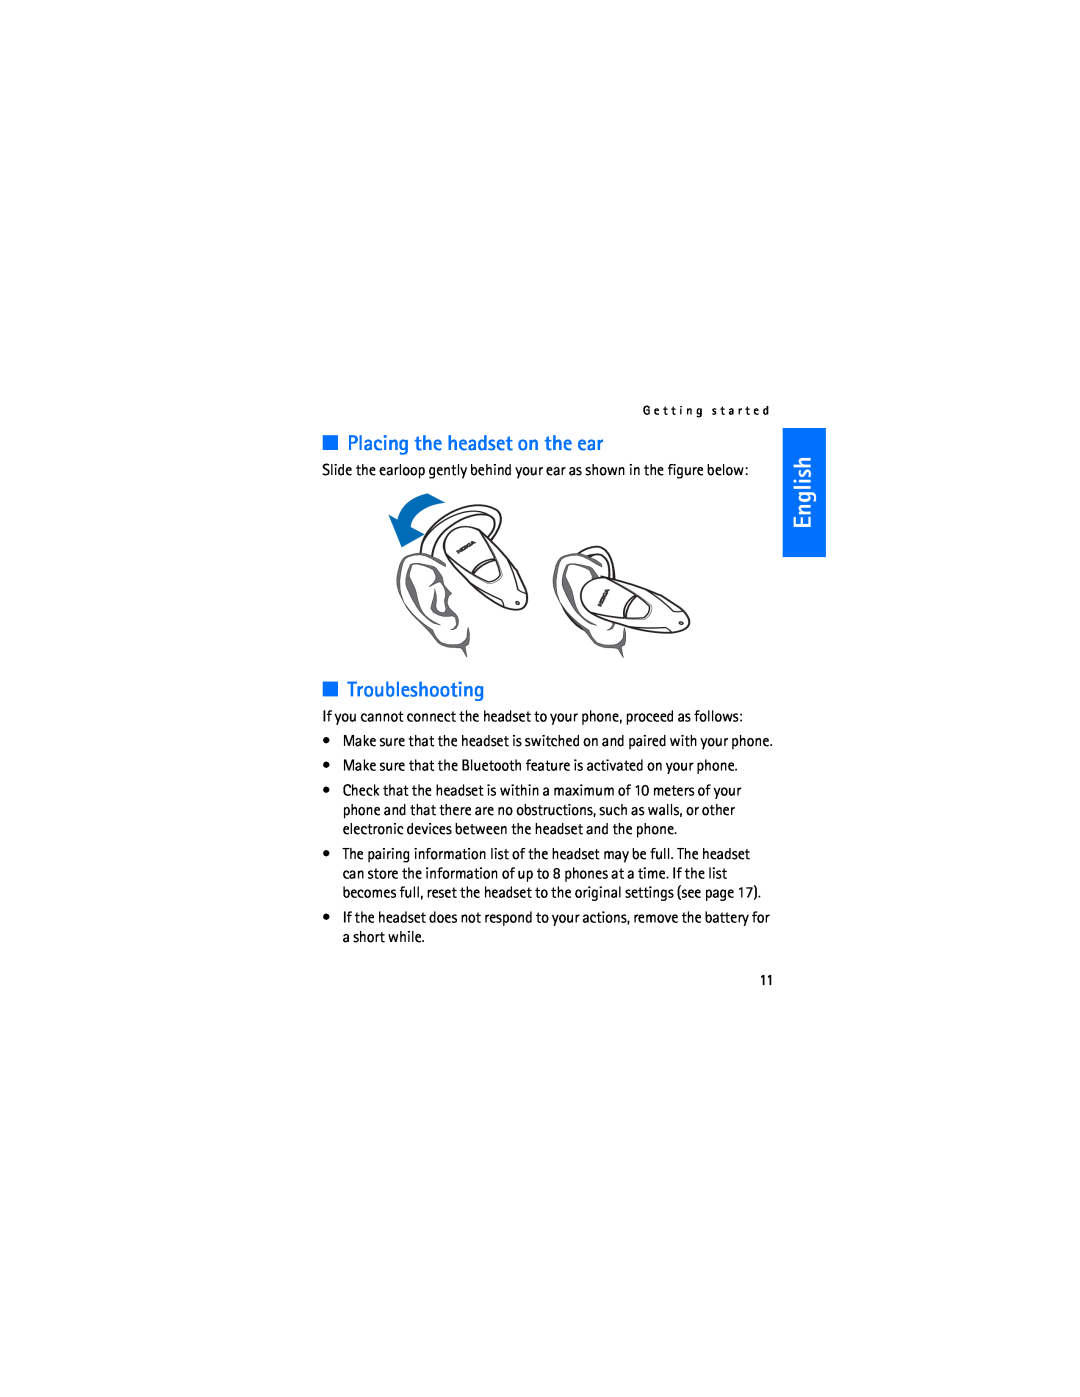 Nokia HDW-3 manual Placing the headset on the ear, Troubleshooting, English 